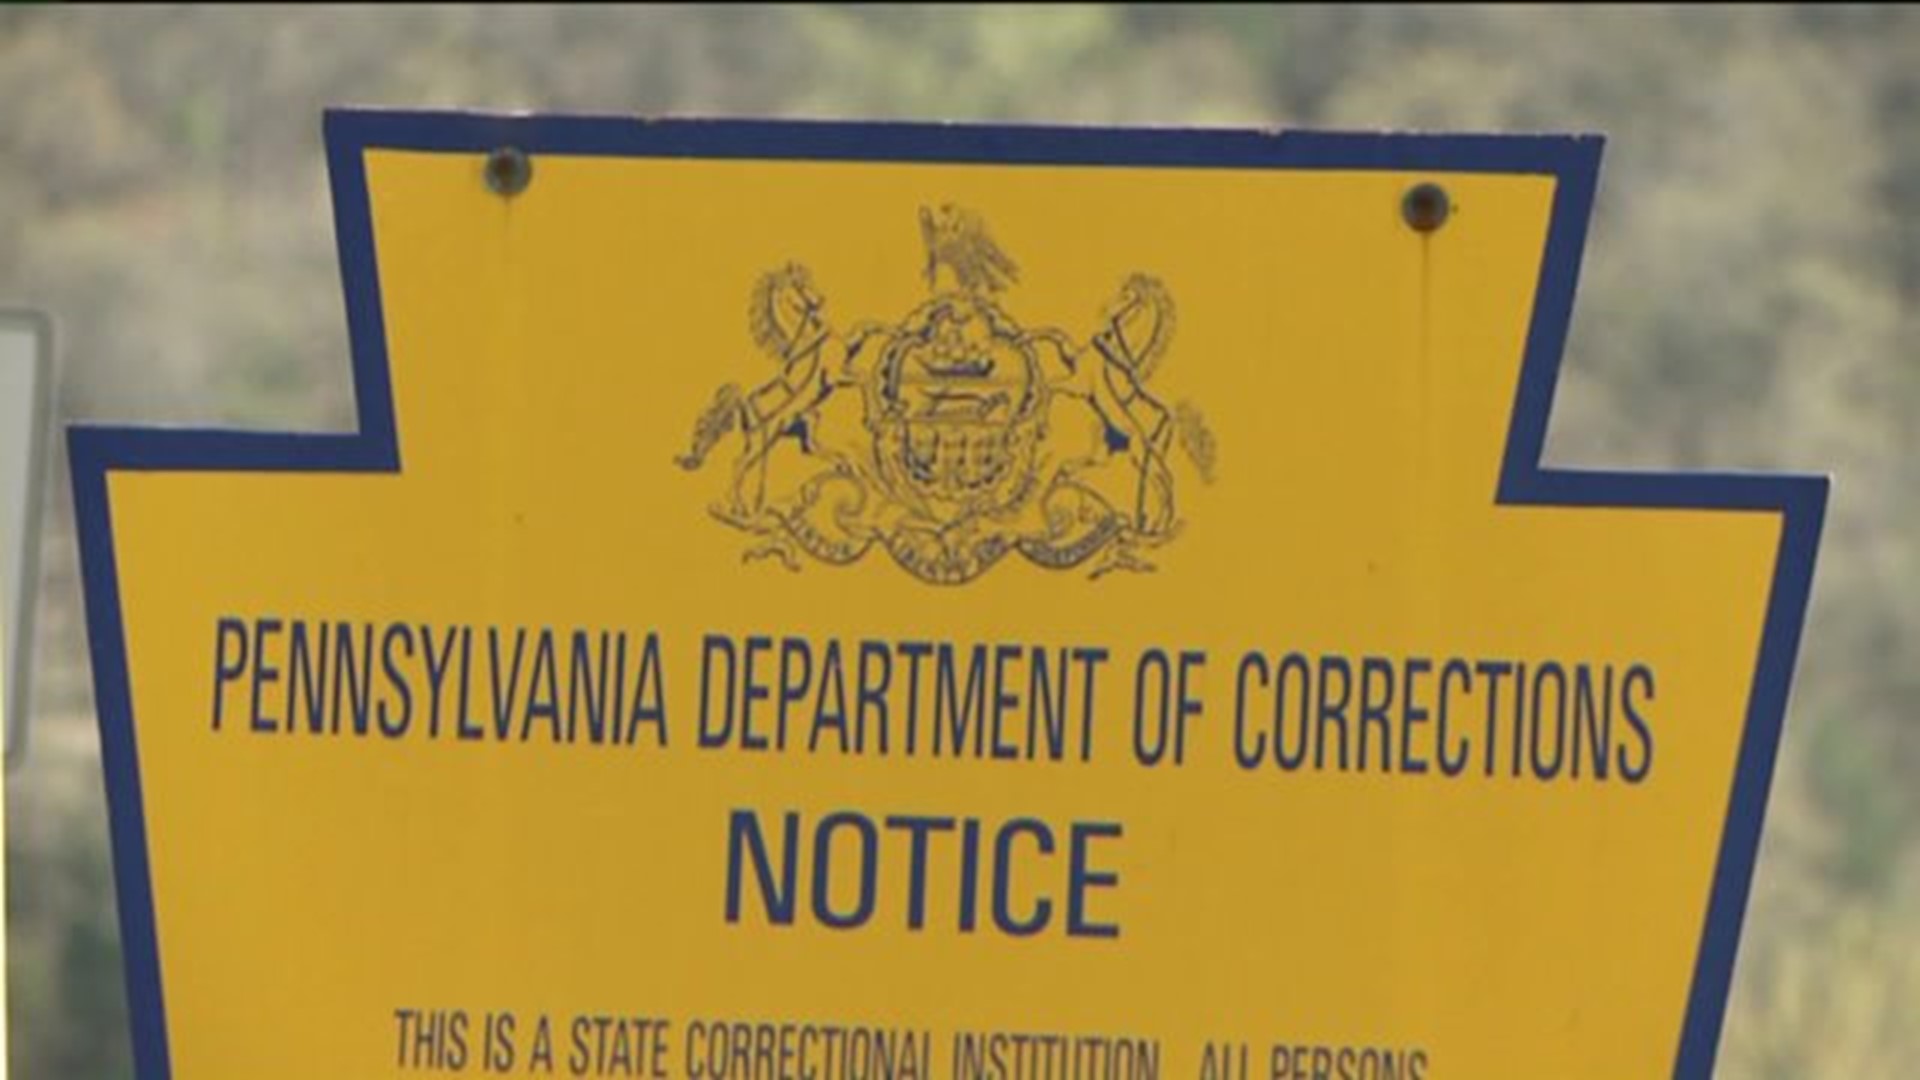 State Plans Closure of Prisons